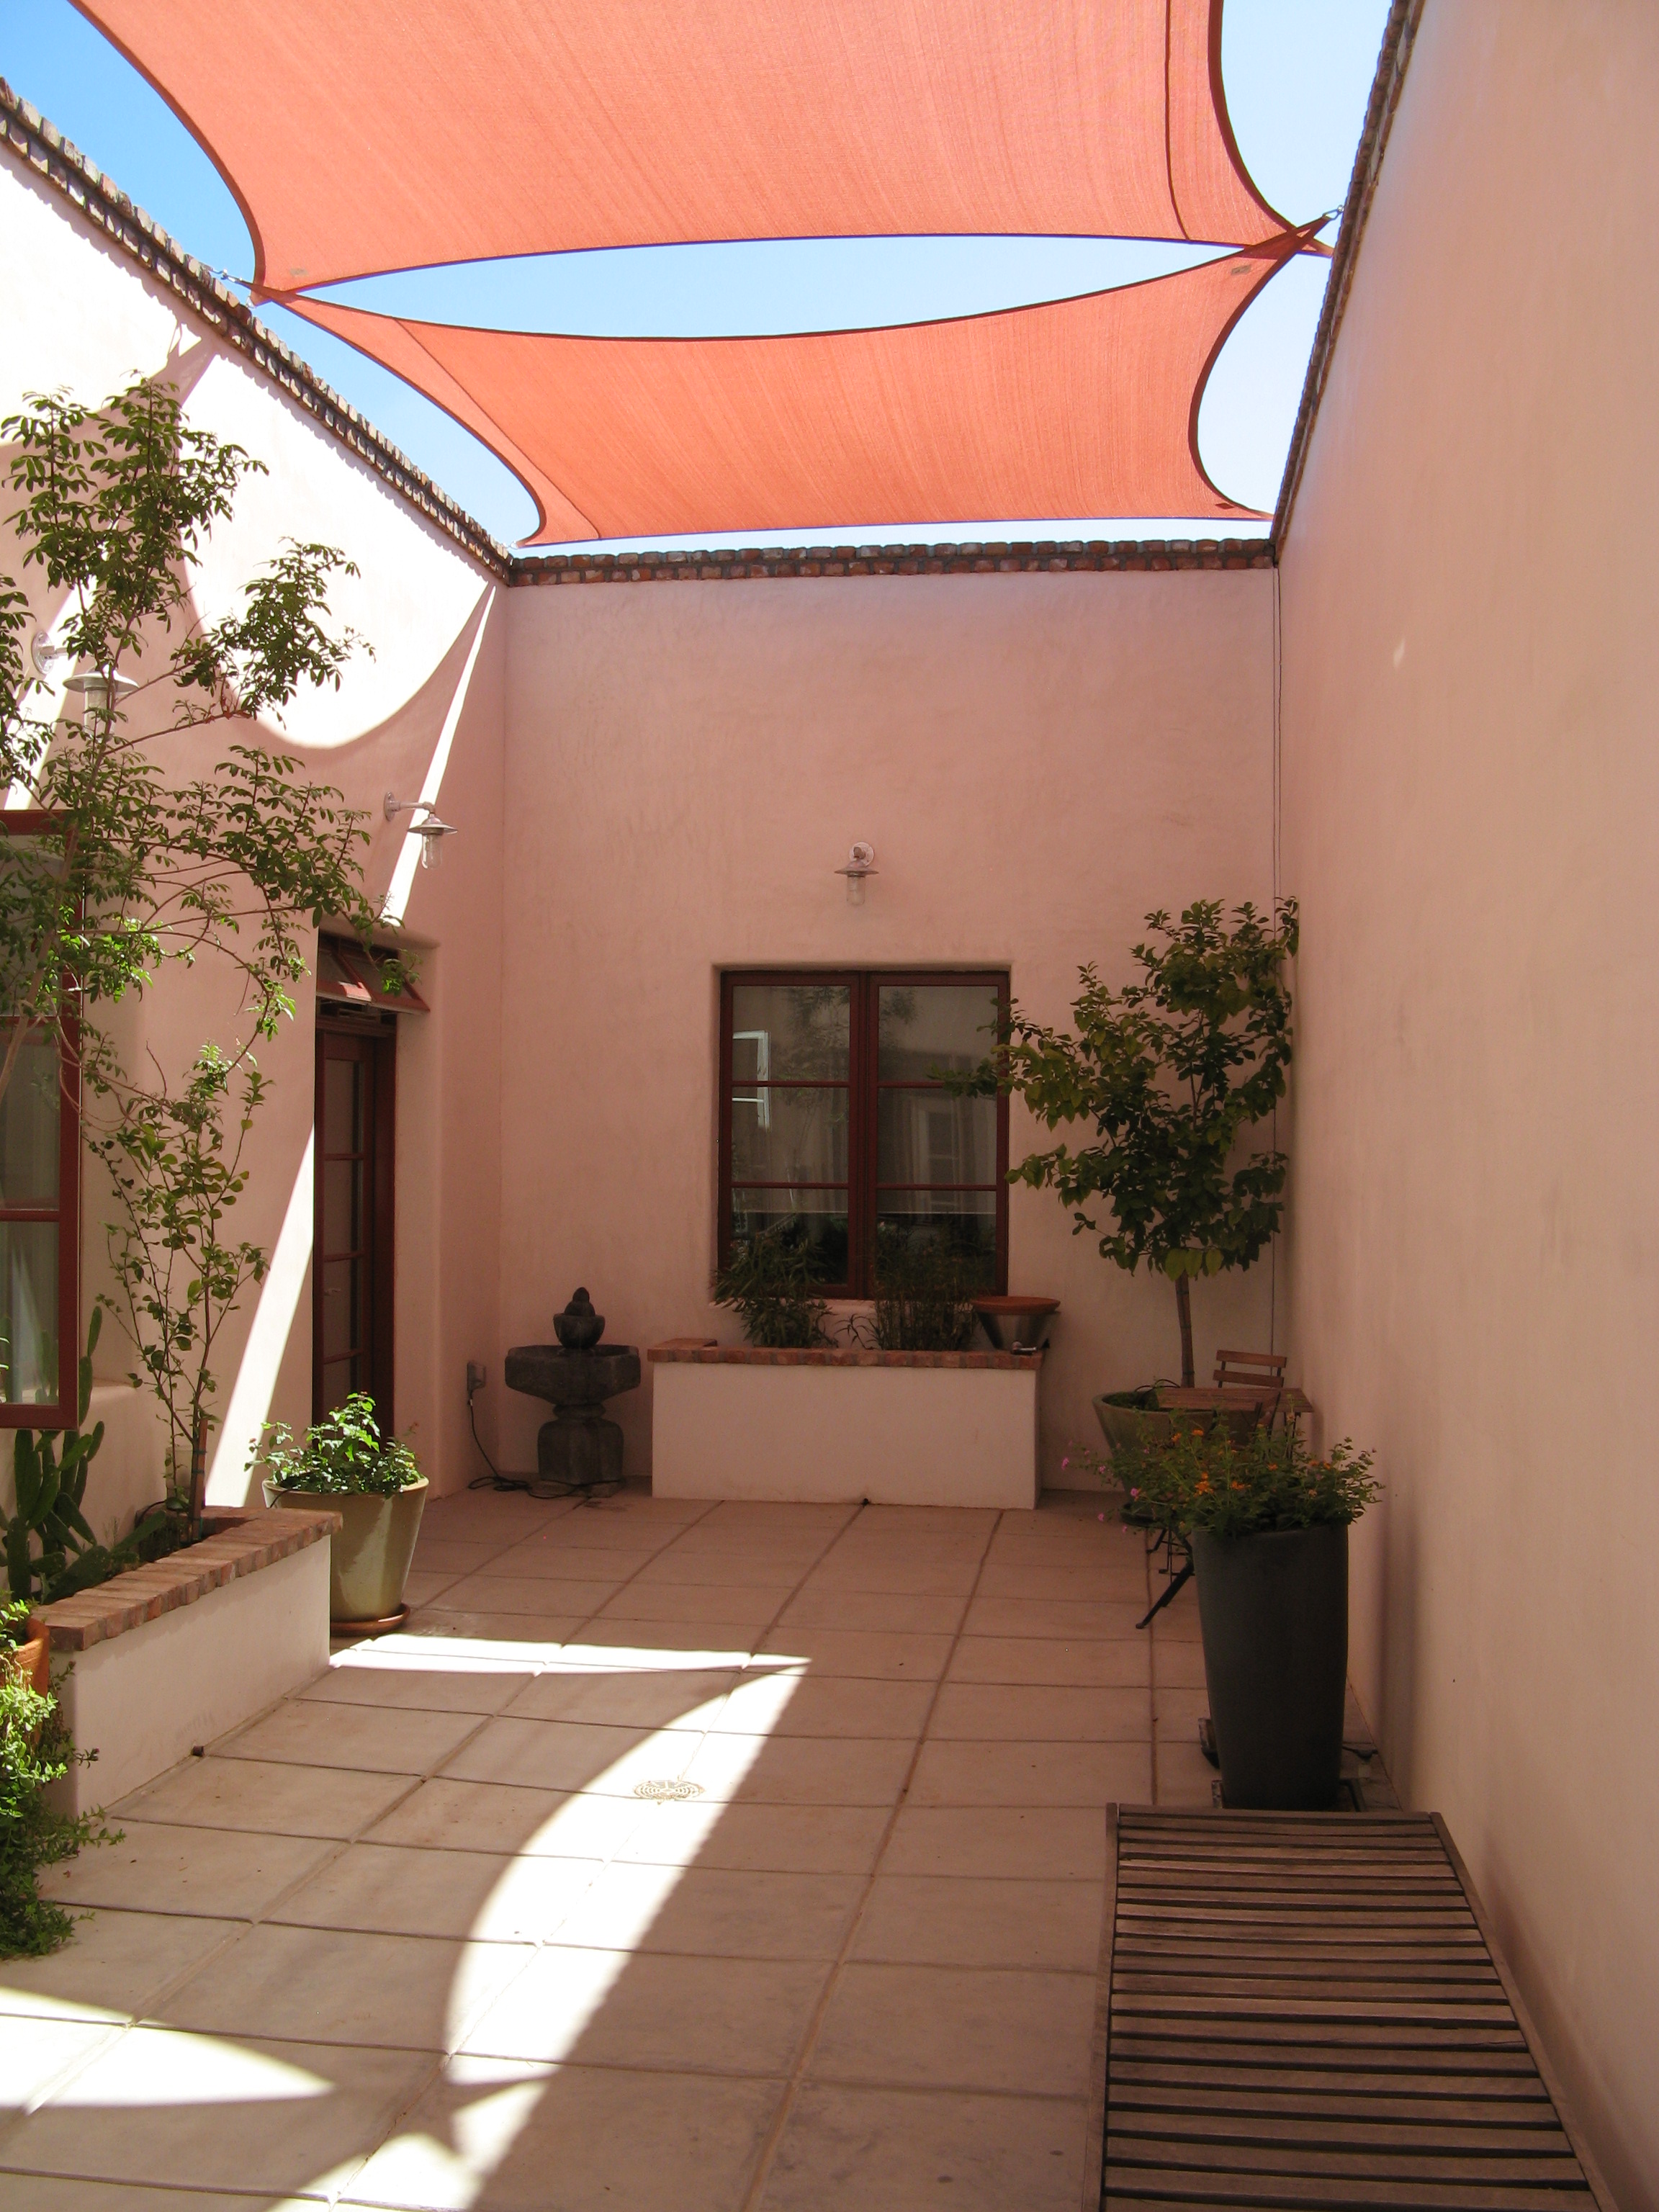 Courtyard with a fabric shade structure, just west of downtown